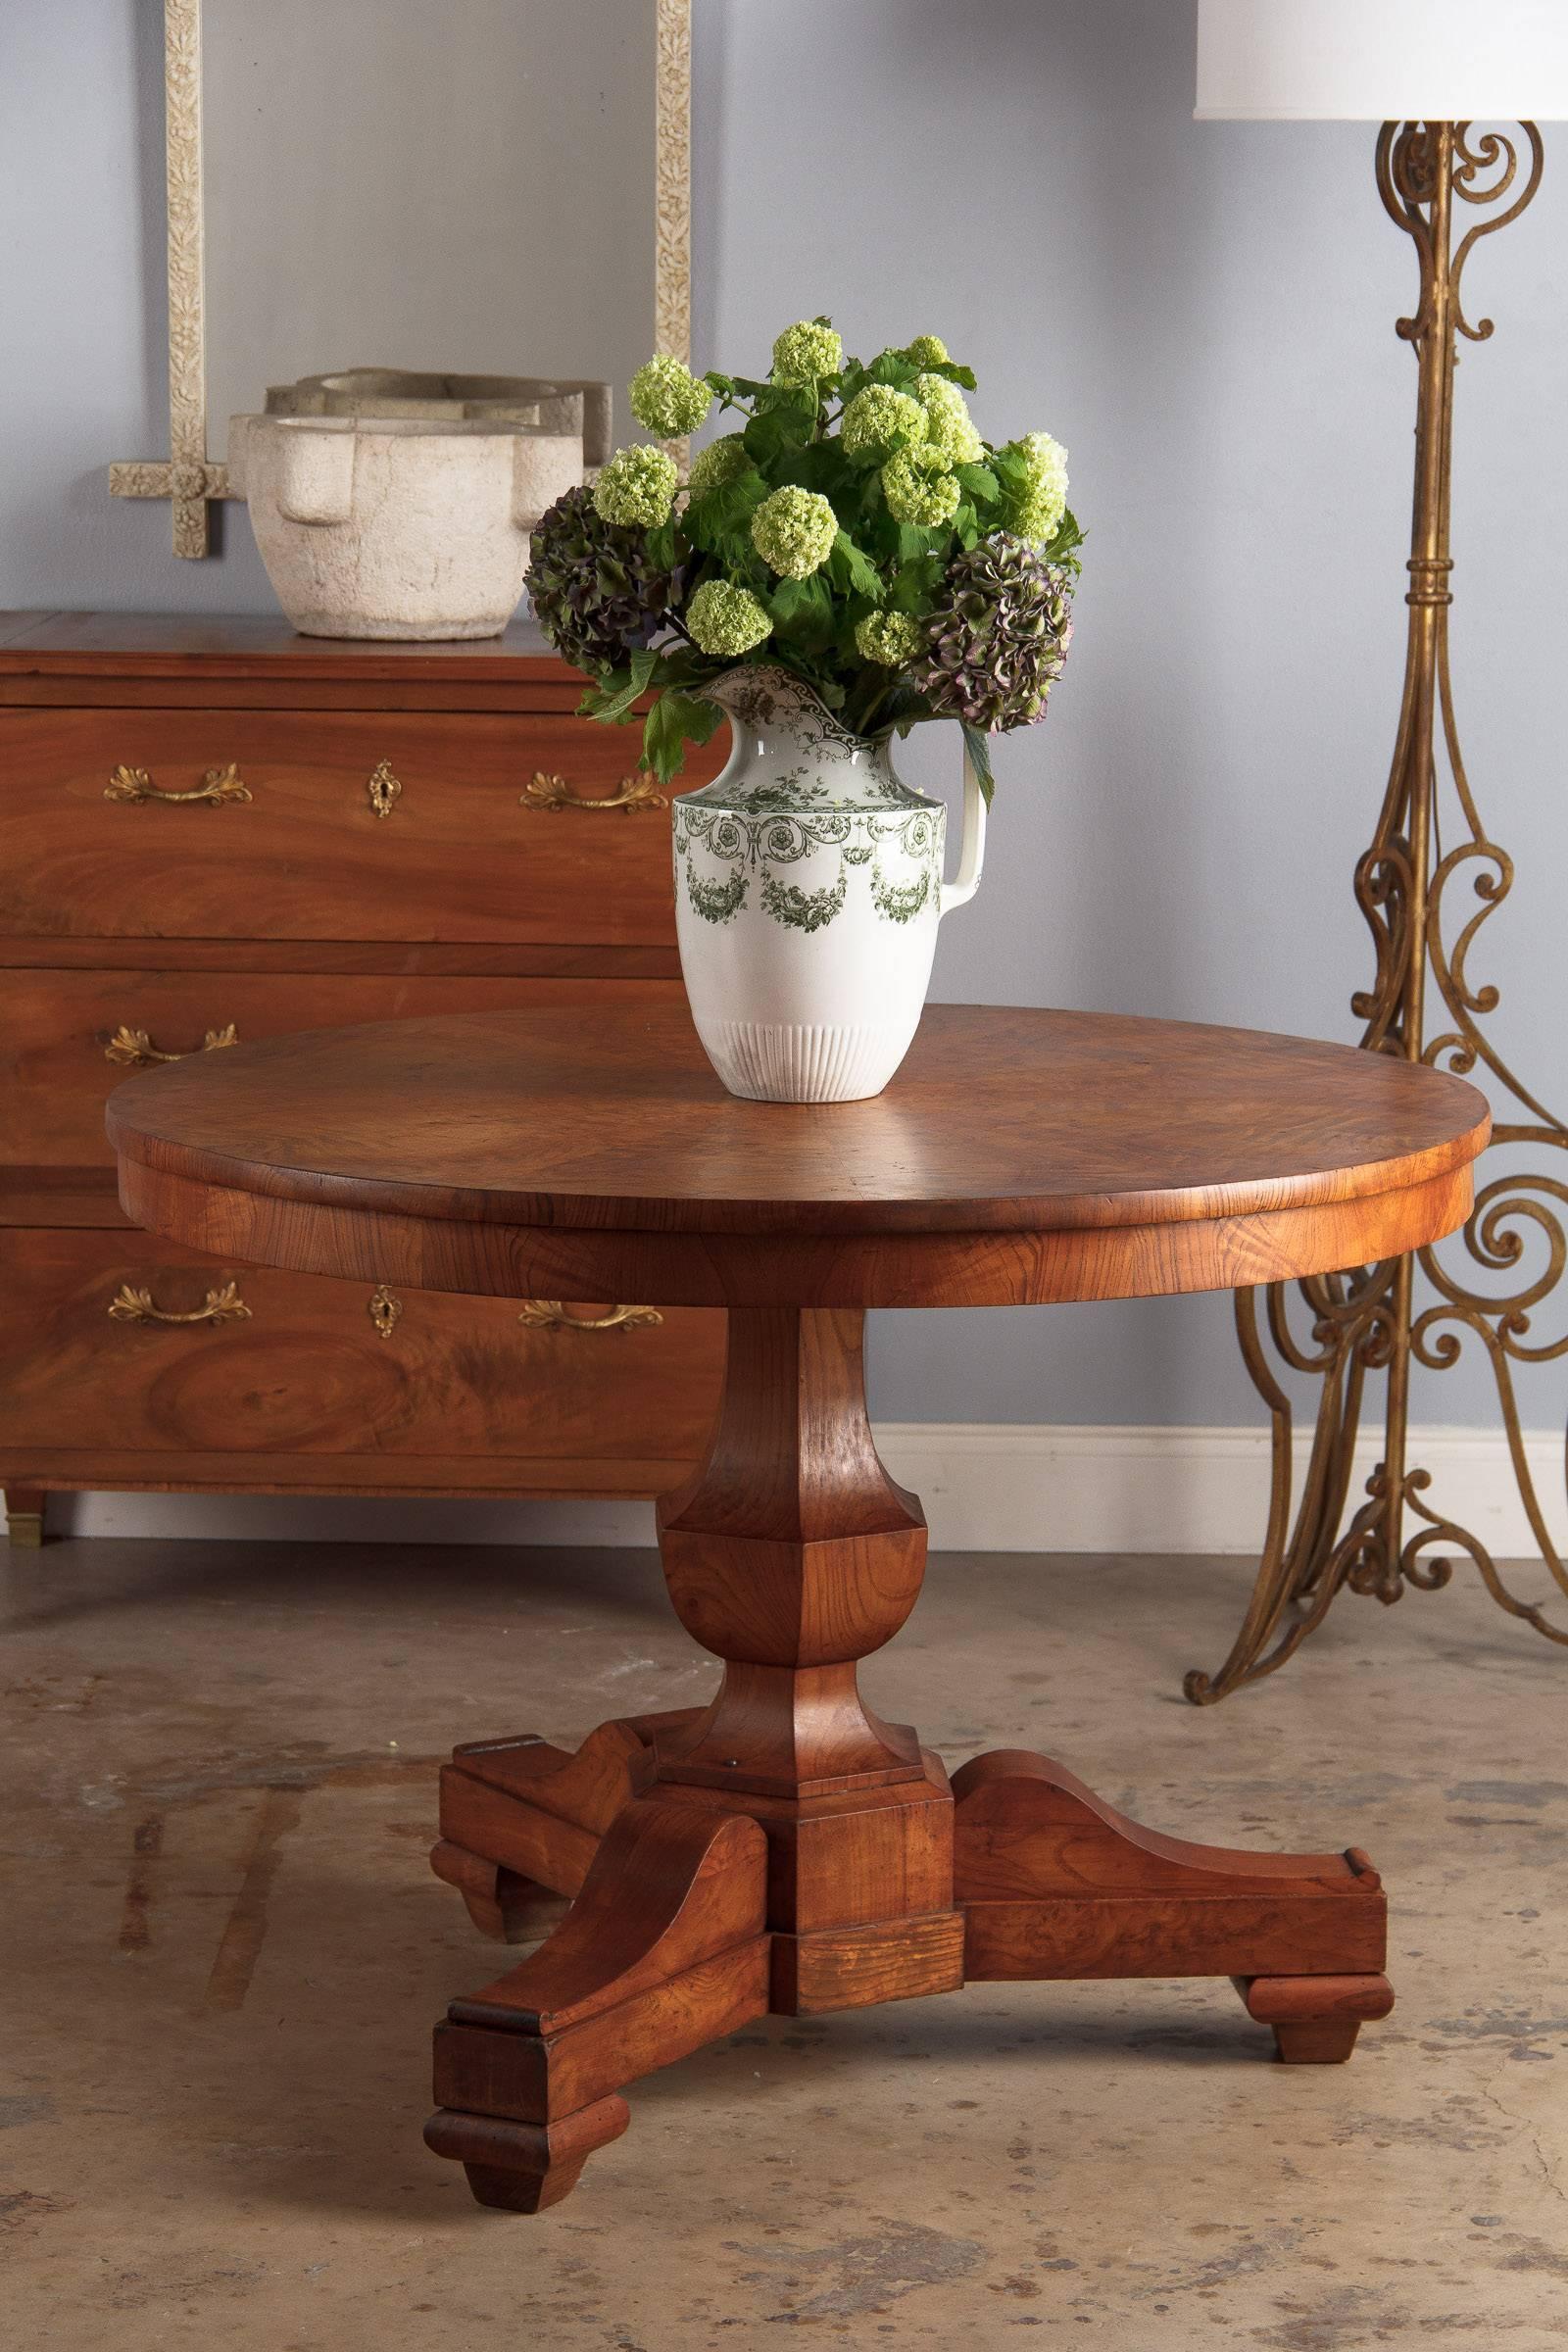 An outstanding pedestal table or gueridon from the Charles X period, early 1800s. Made from solid and burl ashwood, the table has a nice, warm tone throughout. The circular top has gorgeous bookplate veneer and a round inlay of satin wood at its